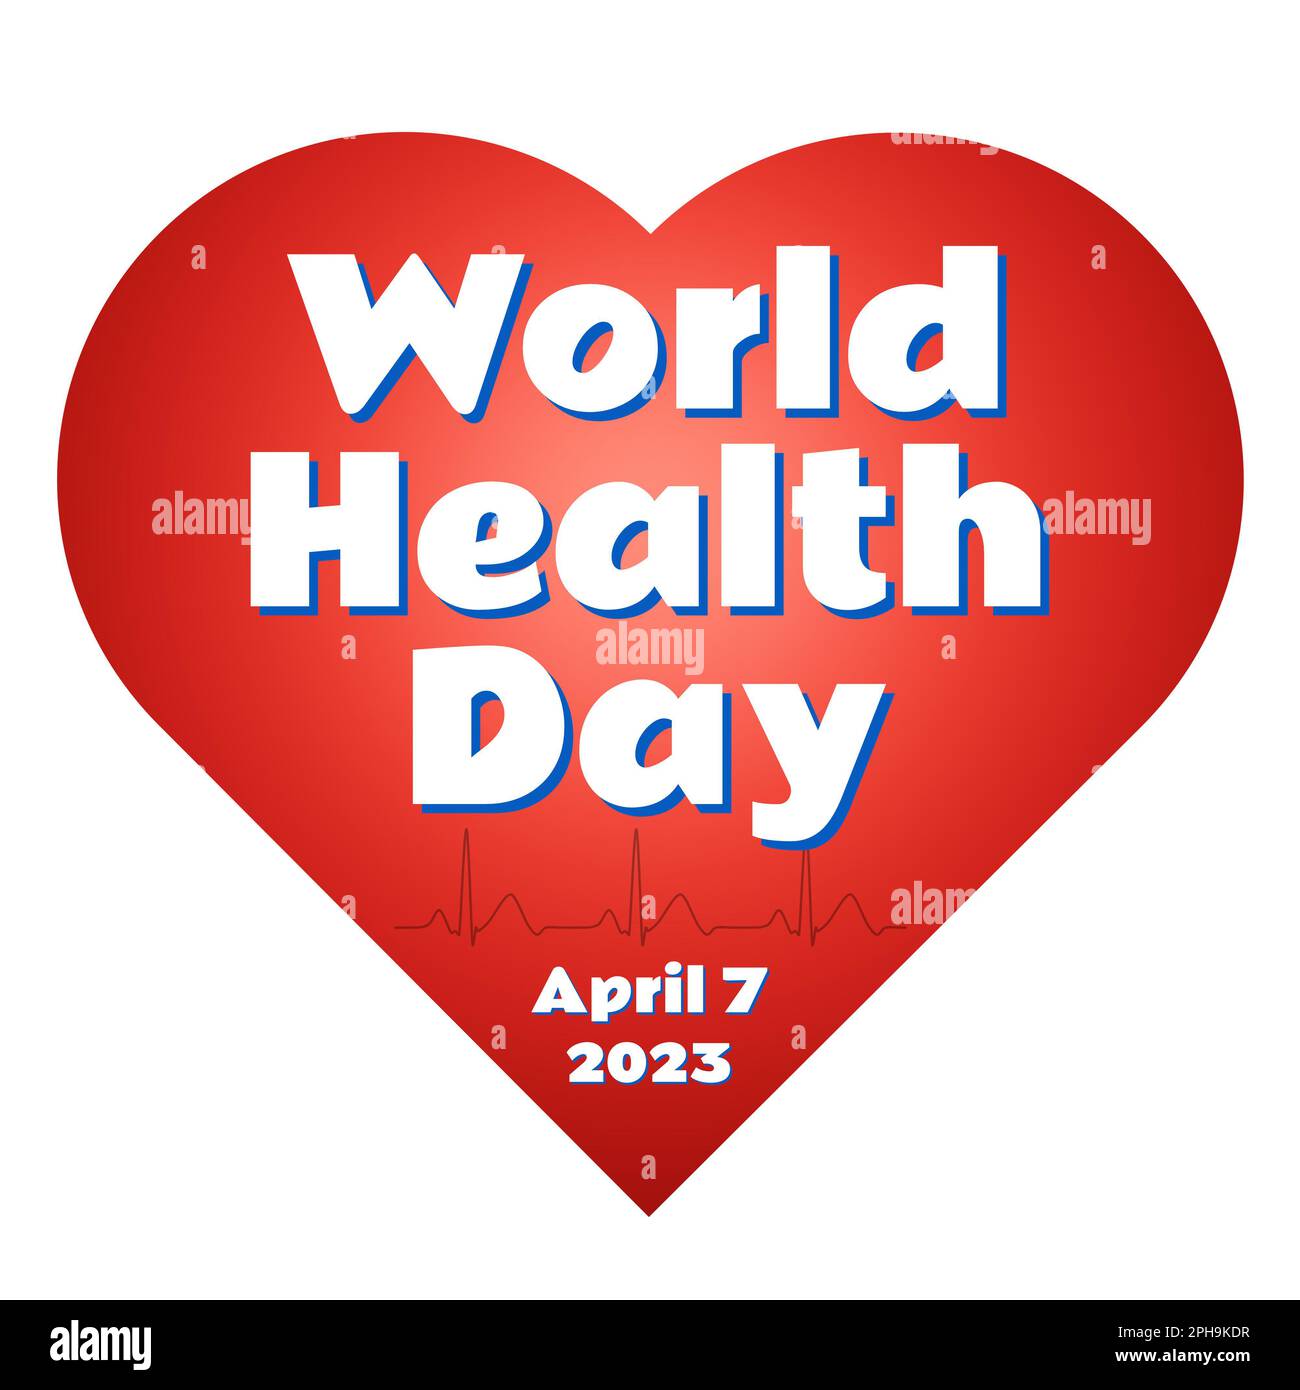 World Health Day April 7th 2023, celebrating global healthcare awareness concept with heartbeat pulse graph and earth globe illustration Stock Photo